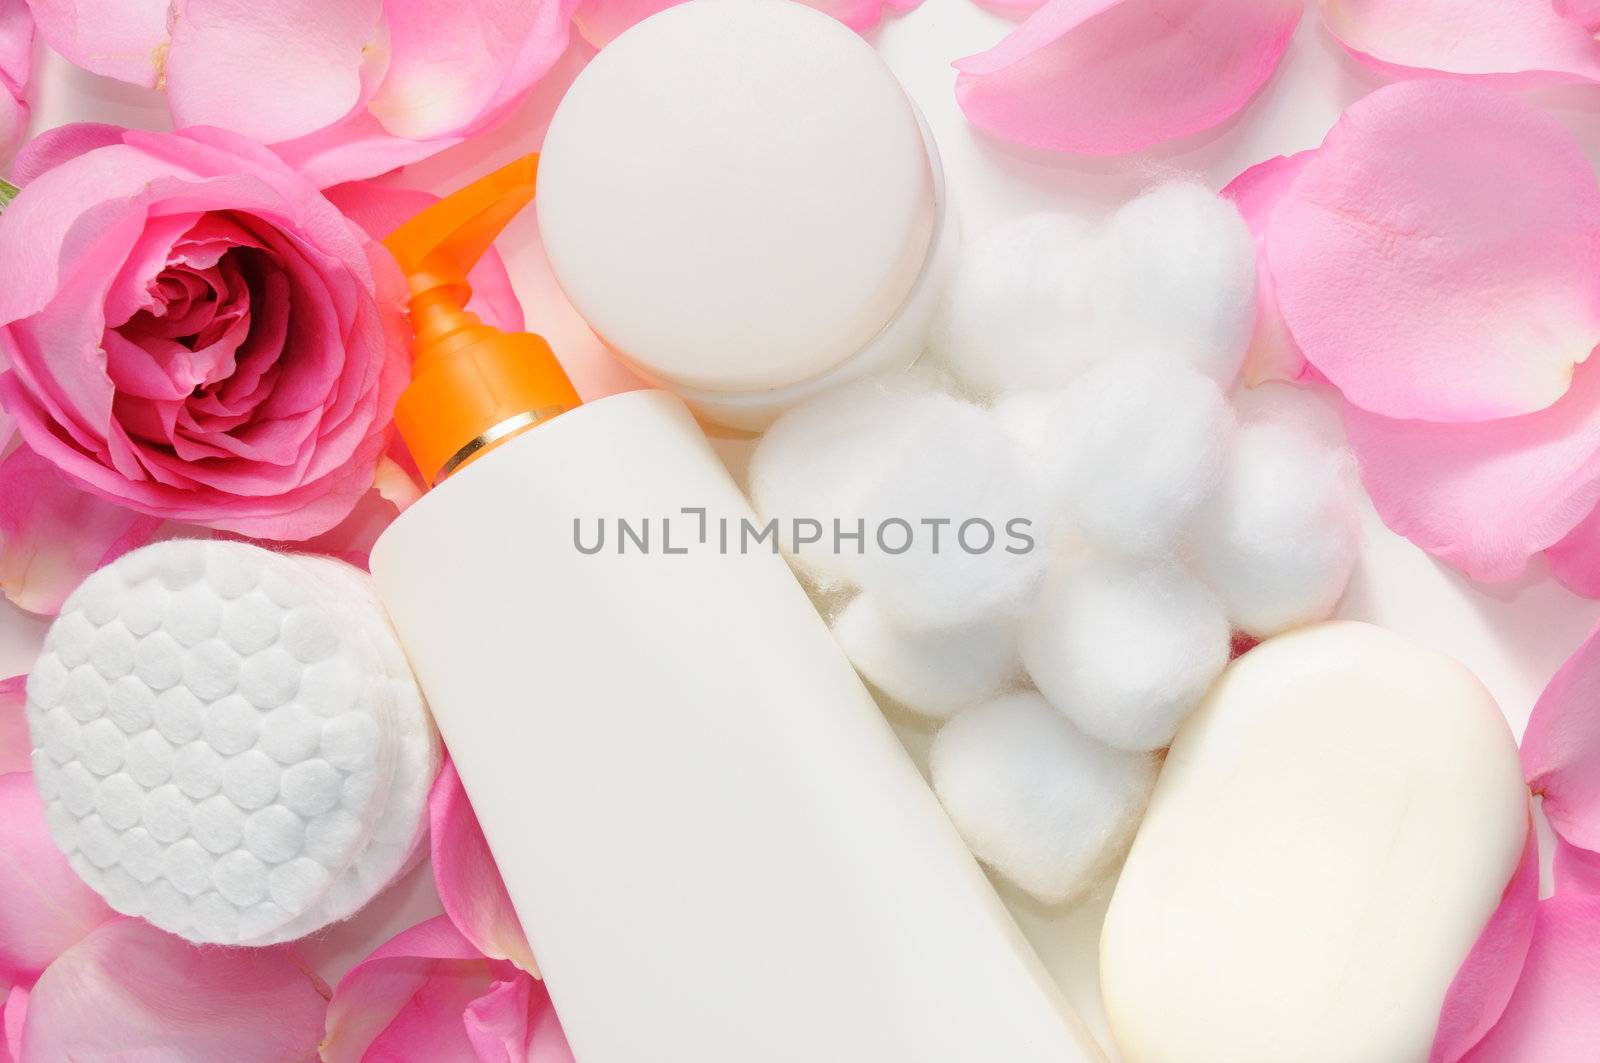 Skin care products with rose petals and cotton swabs